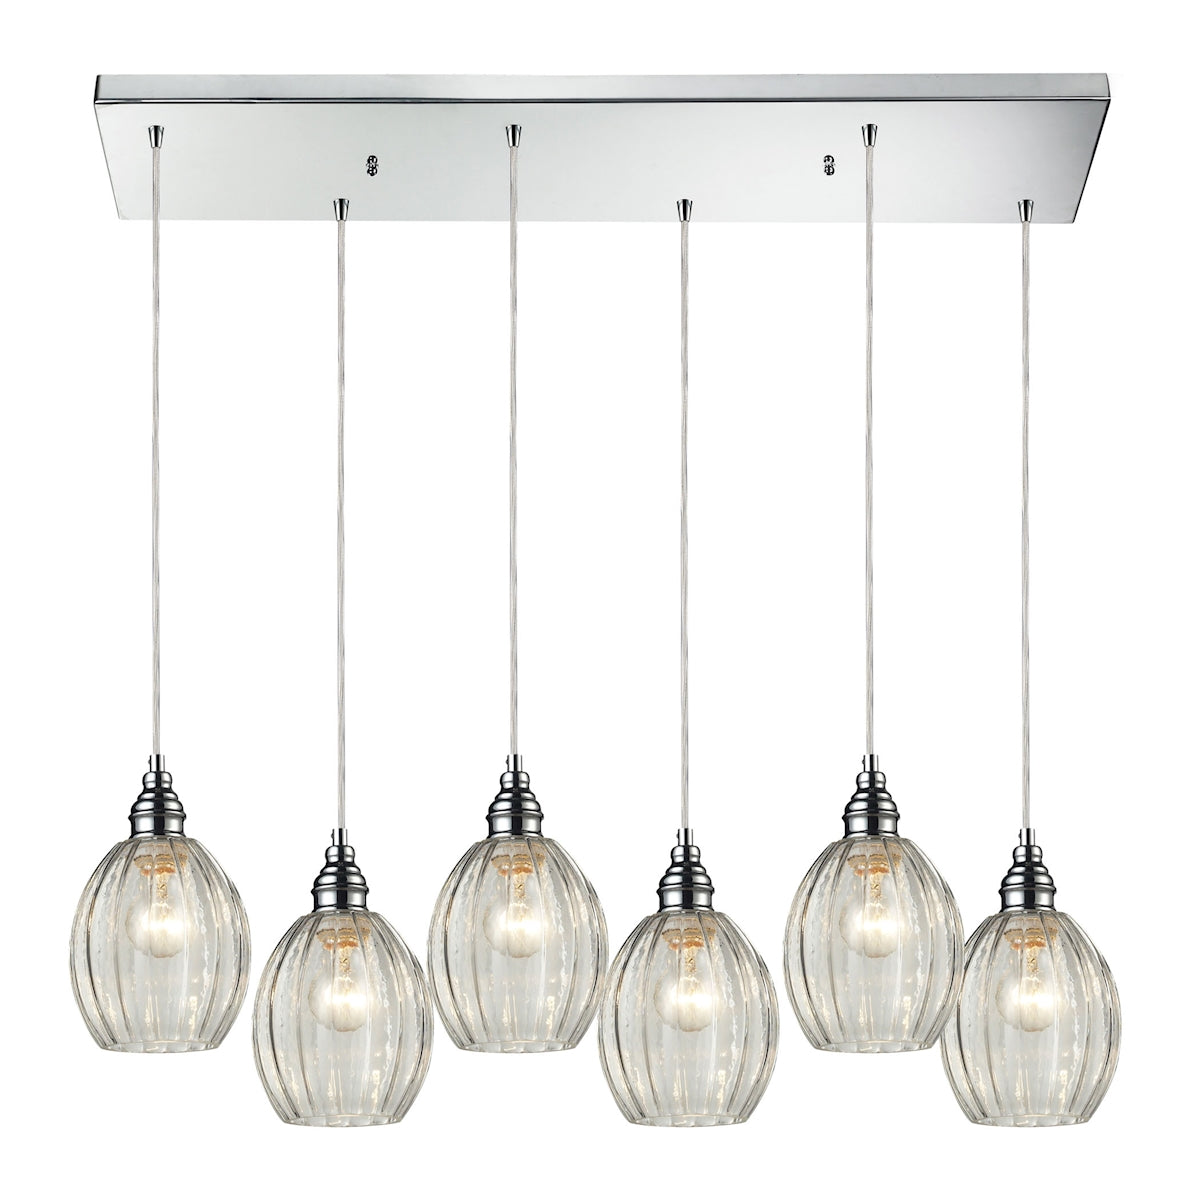 ELK Lighting 46017/6RC Danica 6-Light Rectangular Pendant Fixture in Polished Chrome with Clear Glass